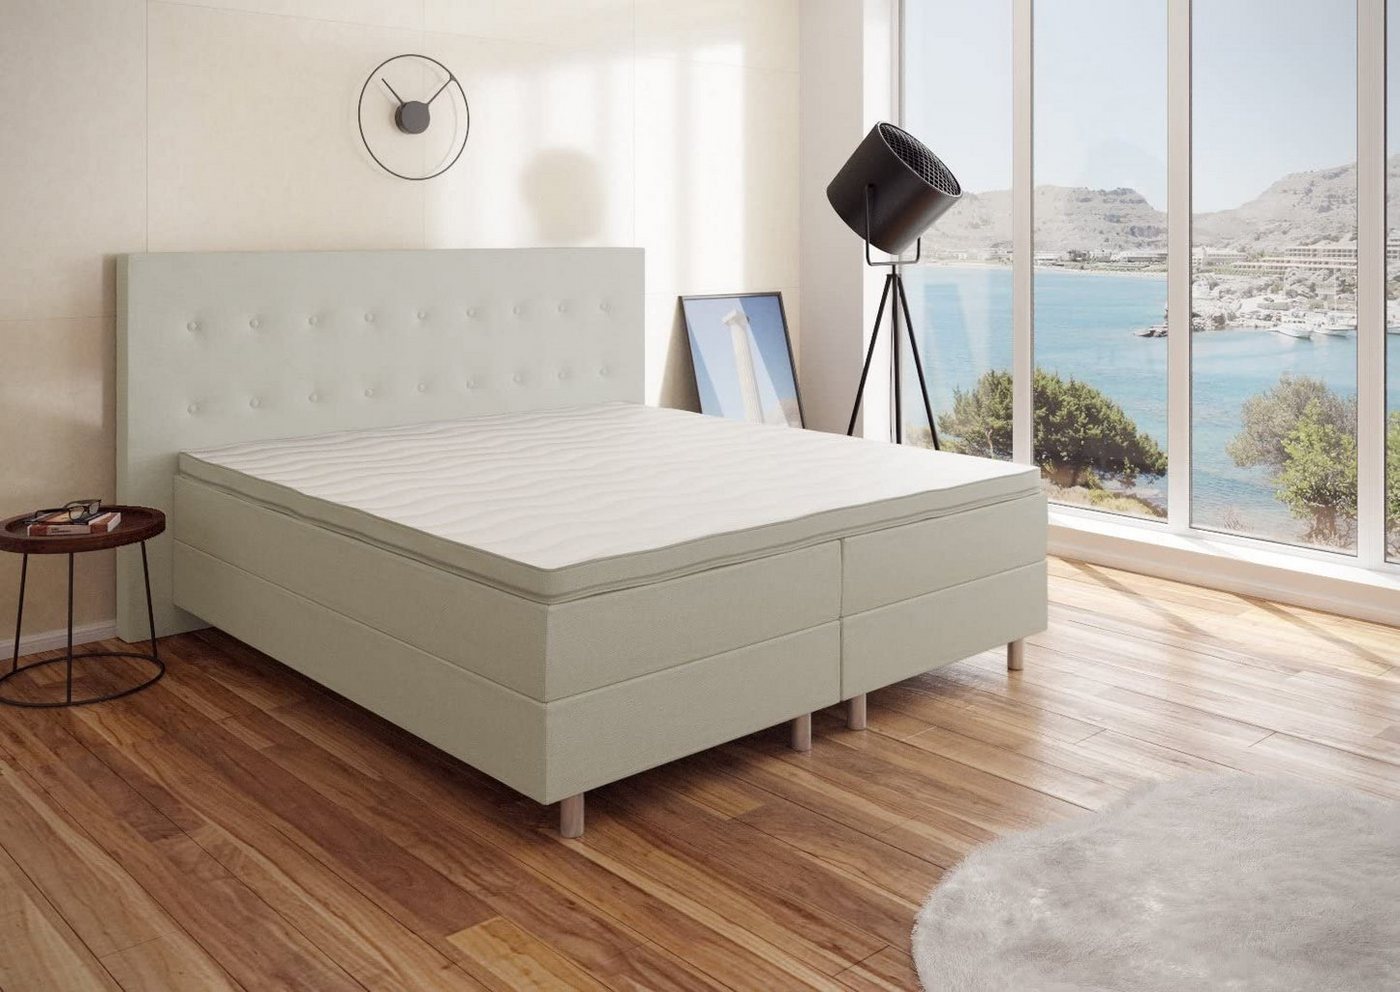 Best for You Boxspringbett Neo, mit Topper von Best for You